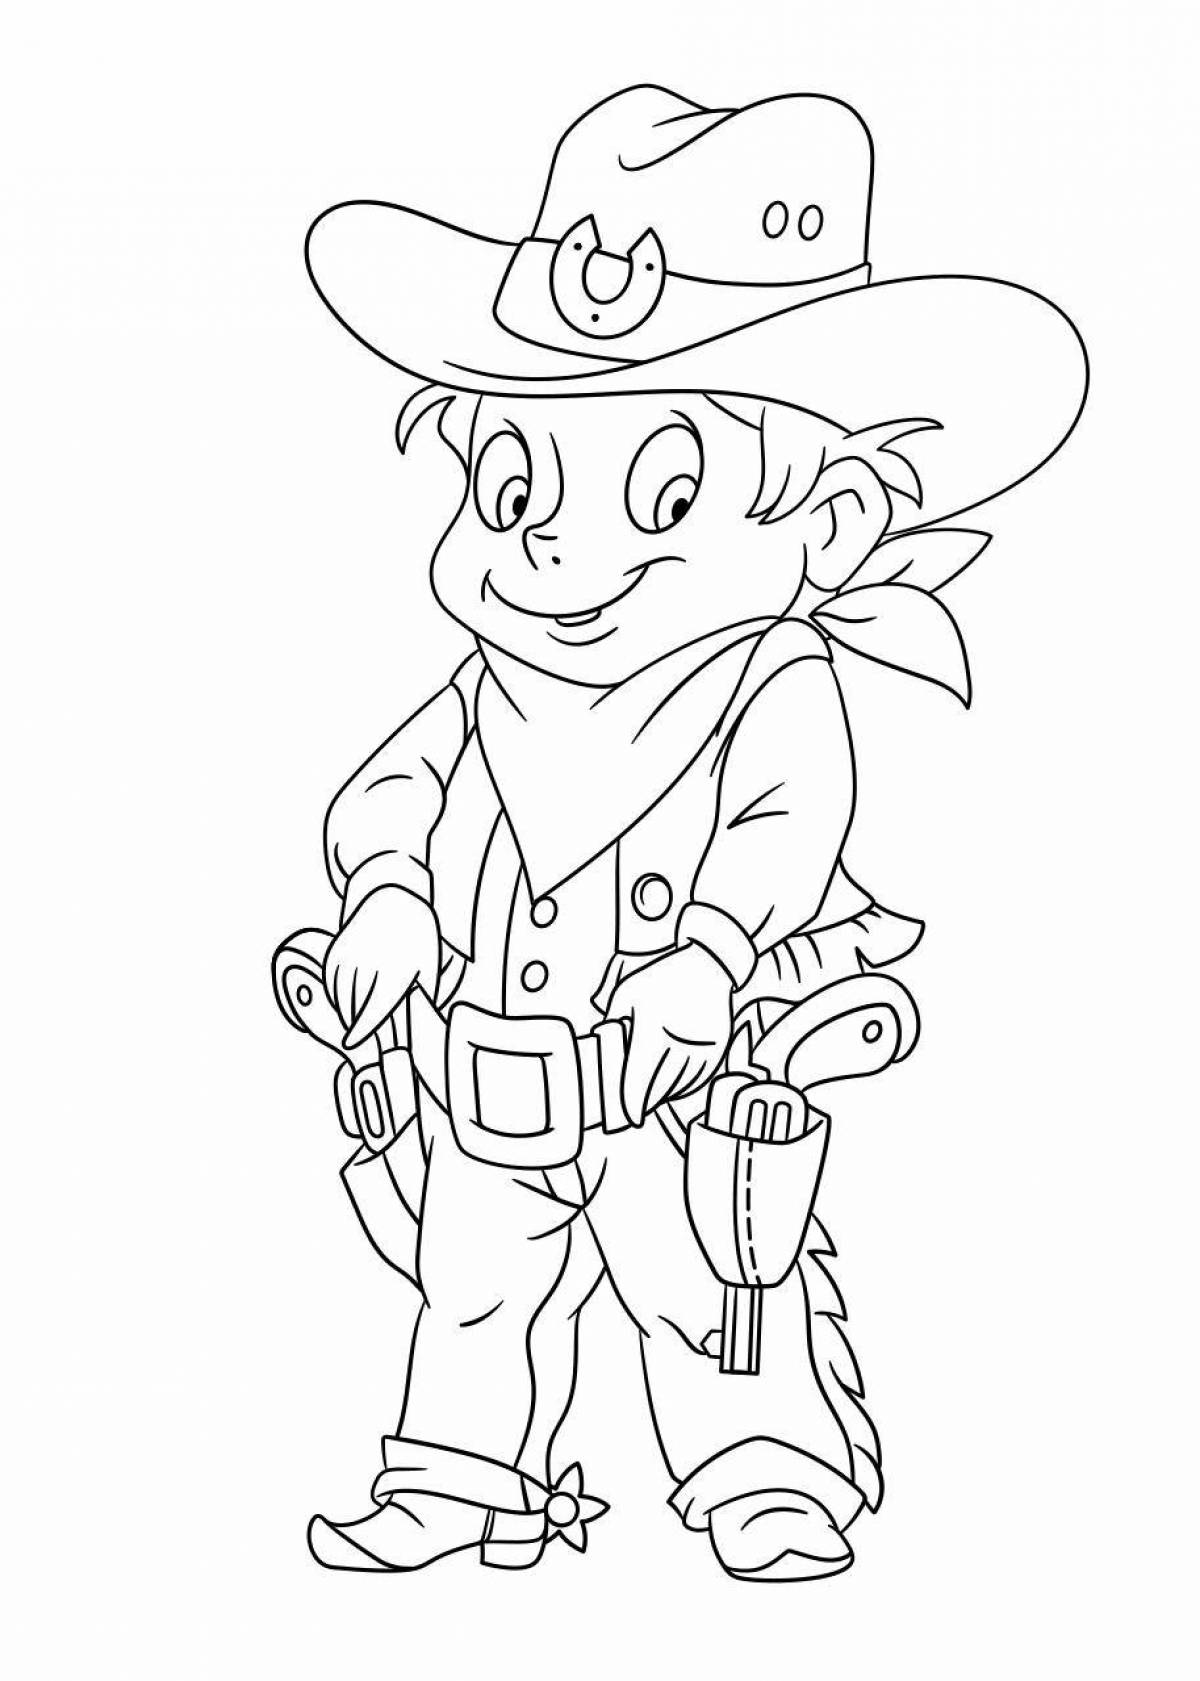 Coloring page majestic sheriff